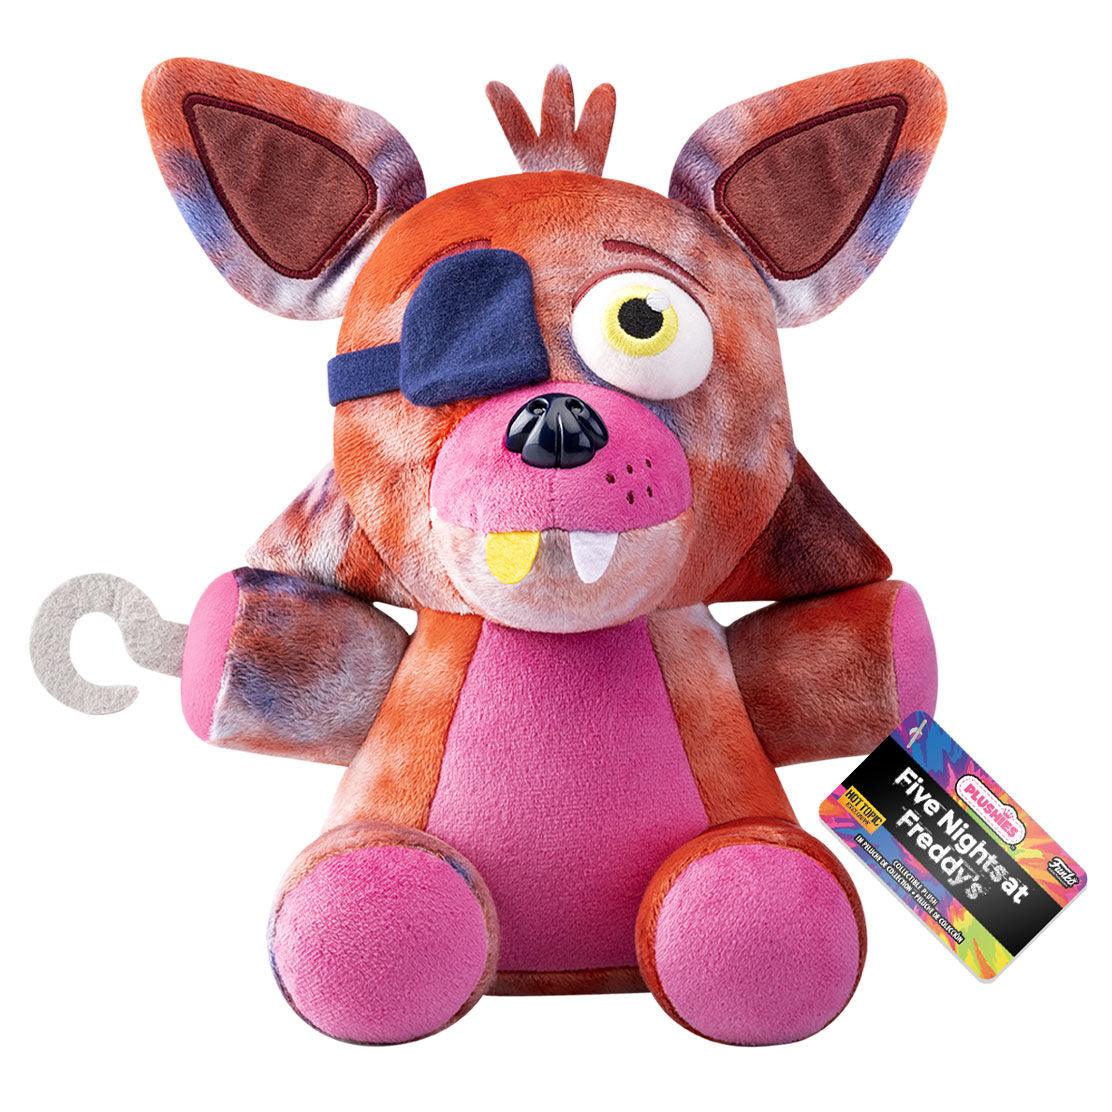 Funko Pop! Games: Five Nights at Freddy's Tie Dye Collectors Set- Bonnie,  Chica, Foxy, and Freddy 